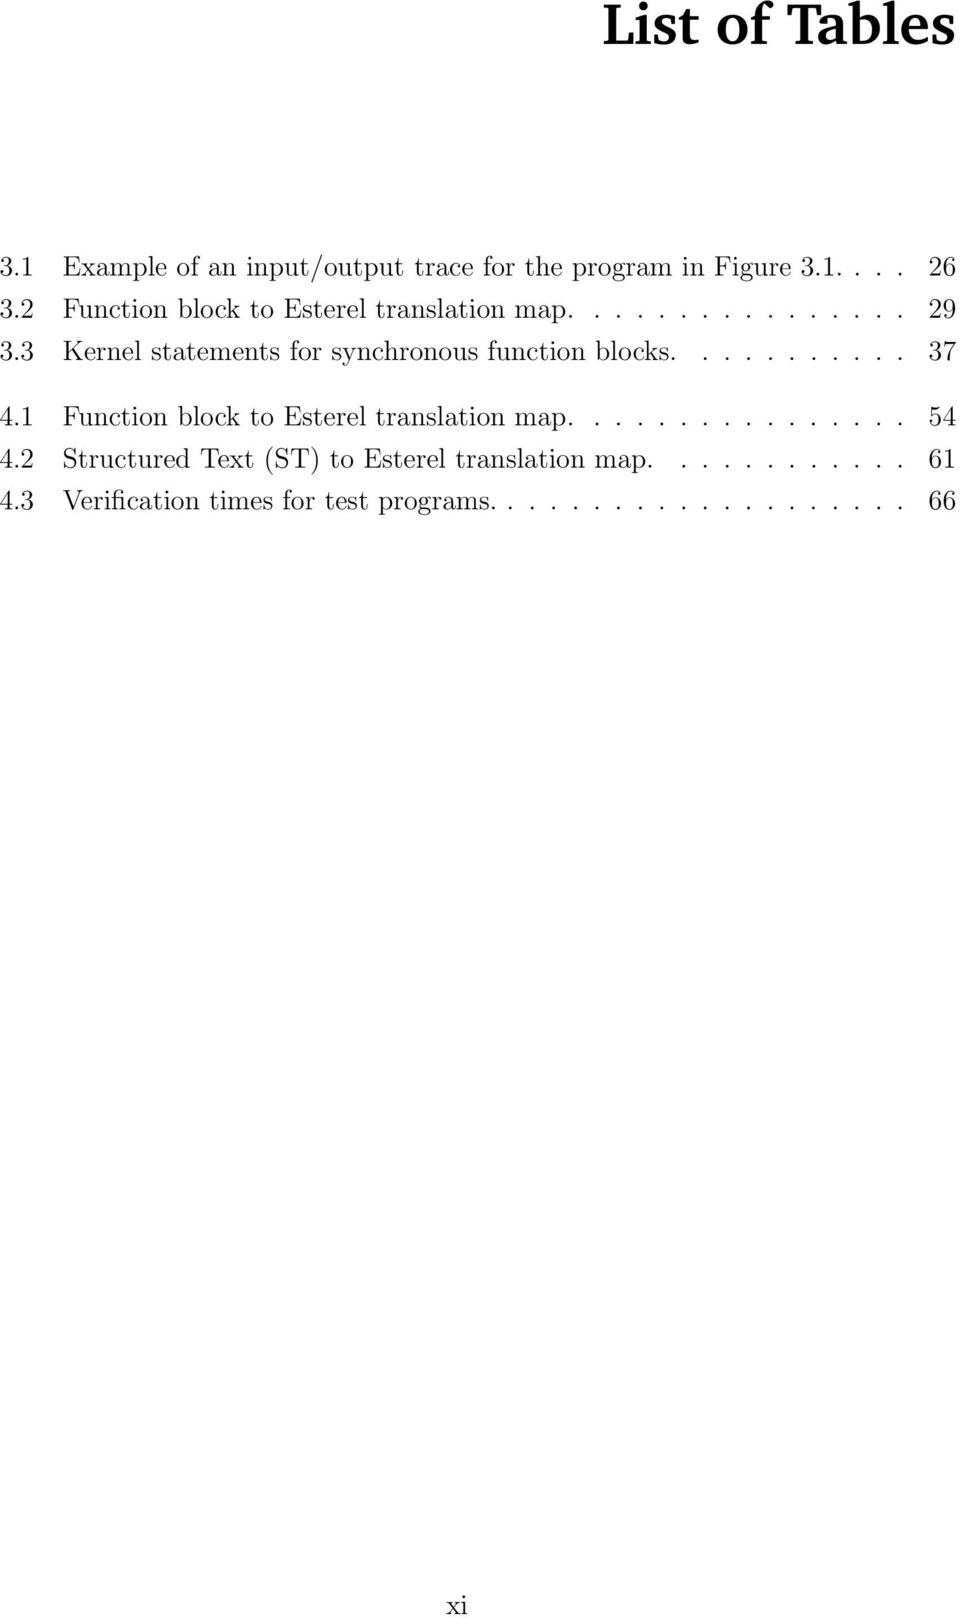 3 Kernel statements for synchronous function blocks........... 37 4.